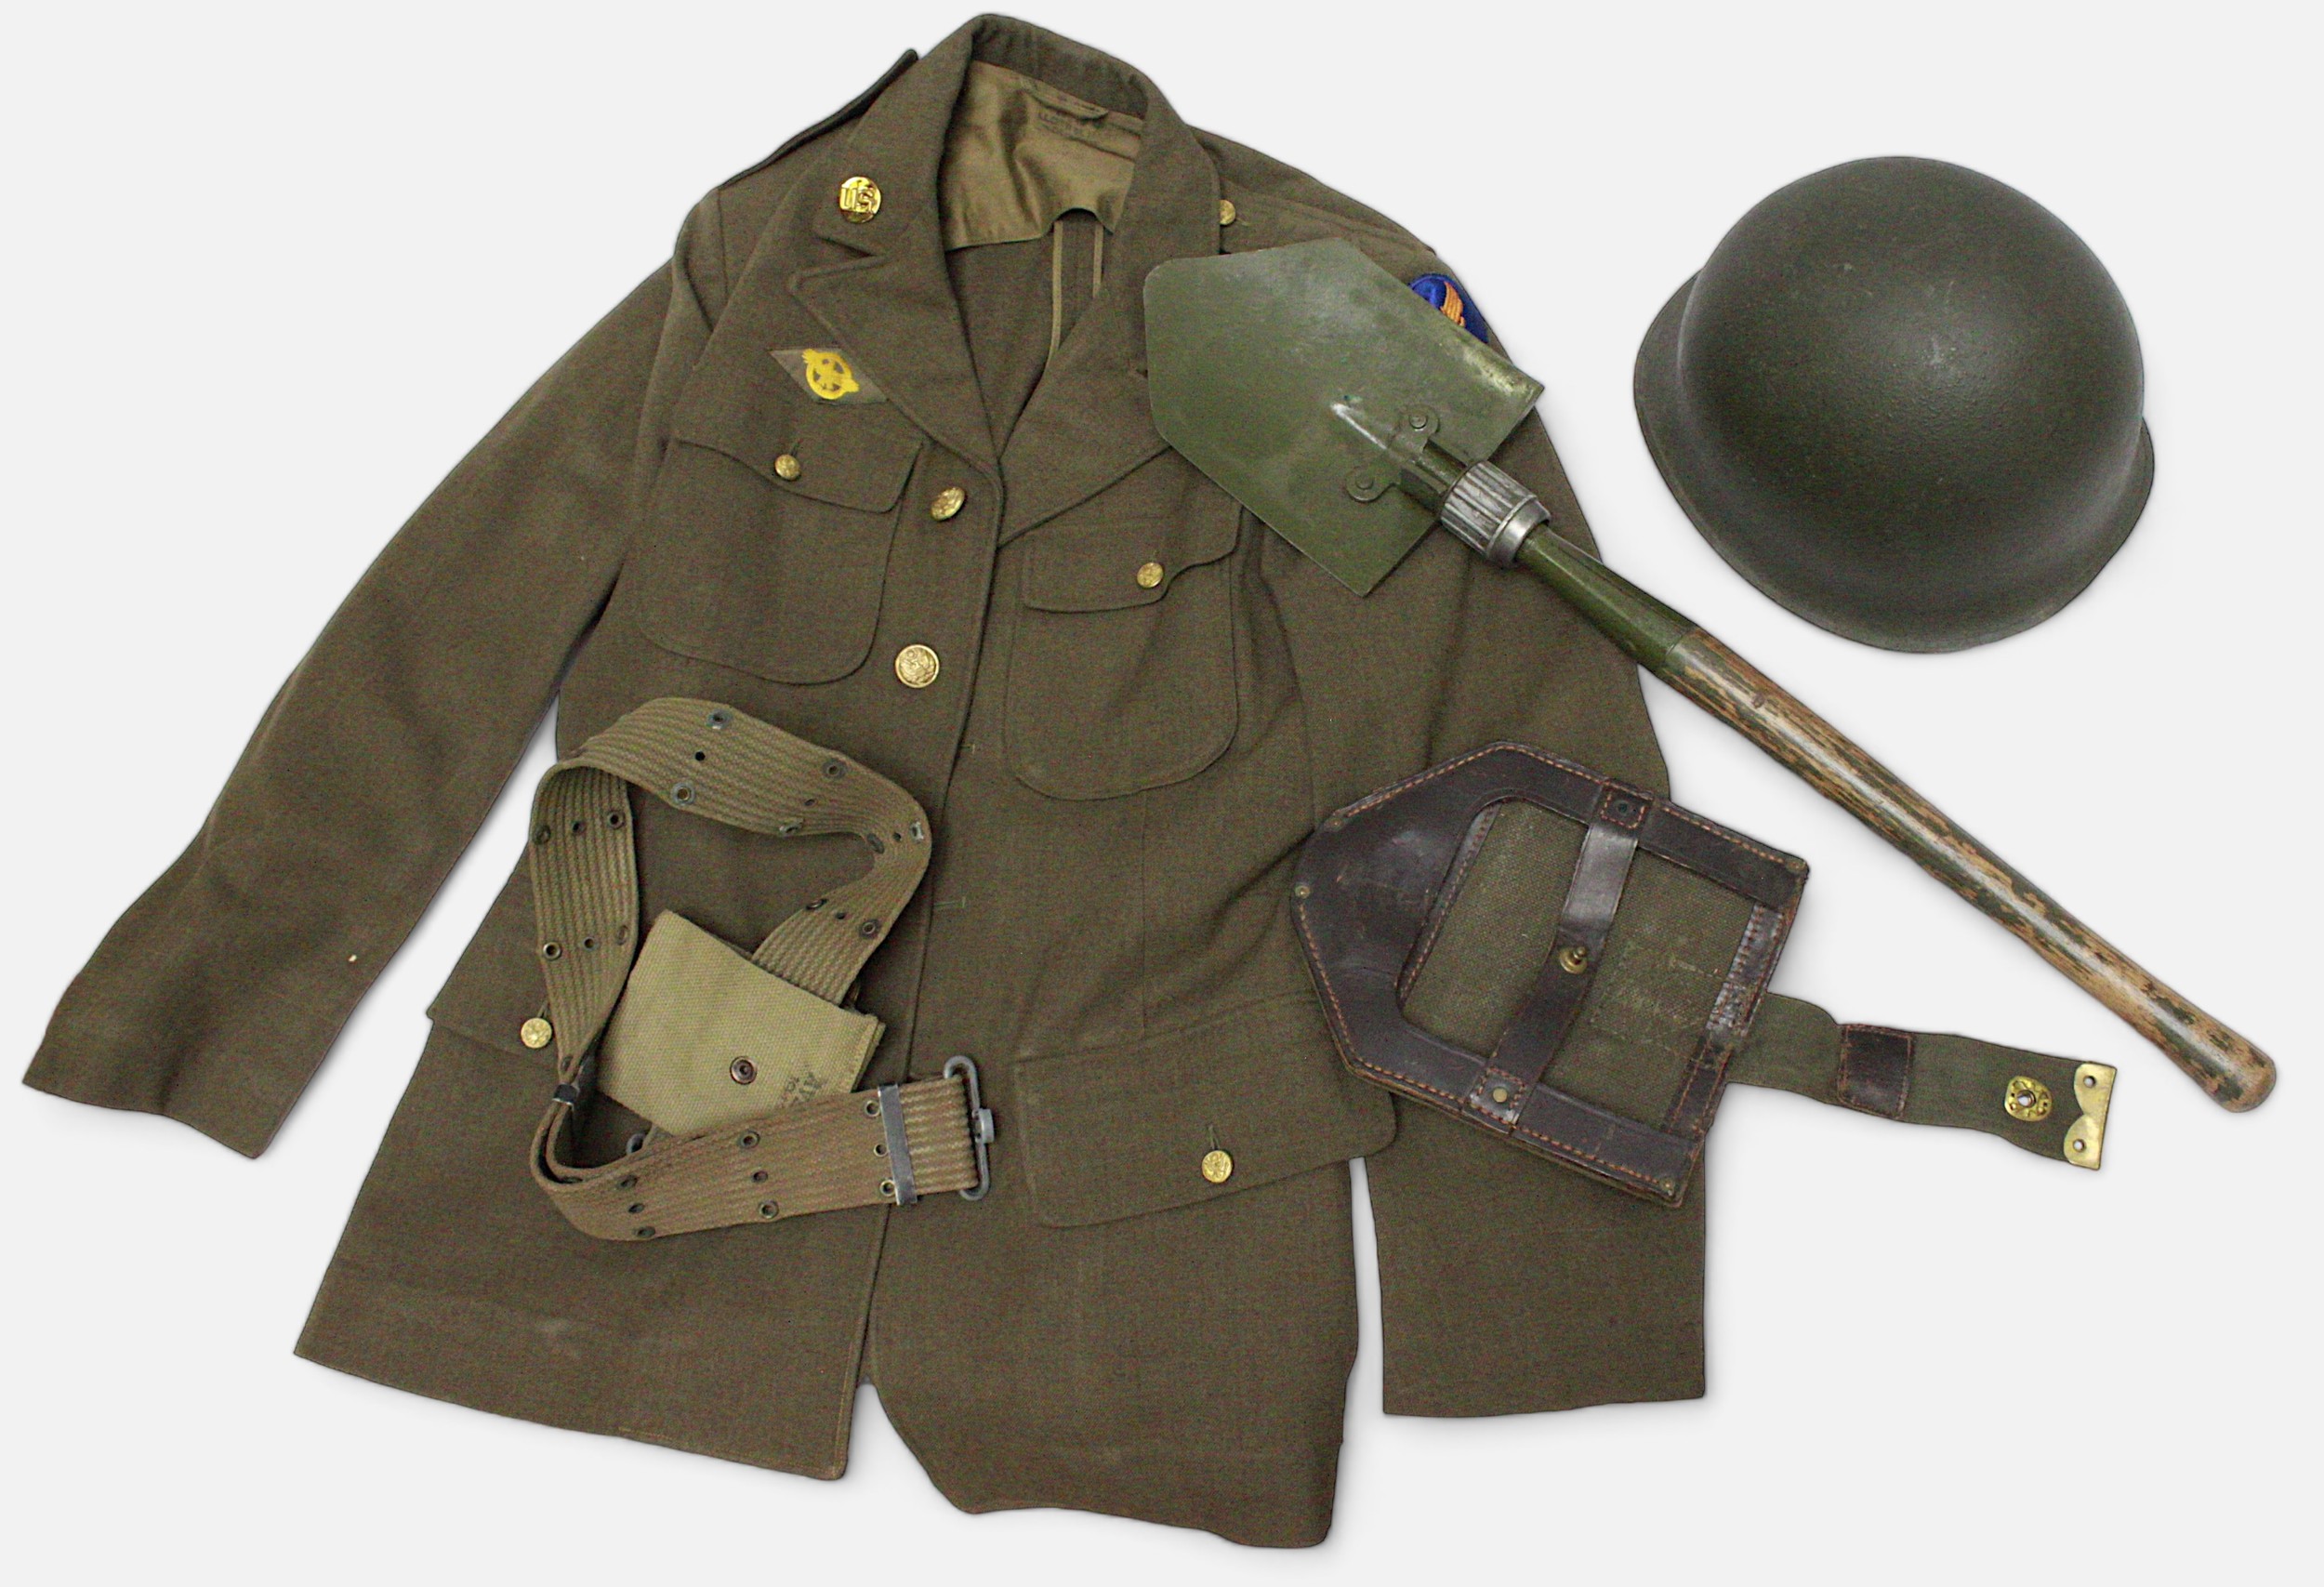 A Second World War US Army M-1943 folding entrenching tool, M1 Combat Helmet, webbing belt with